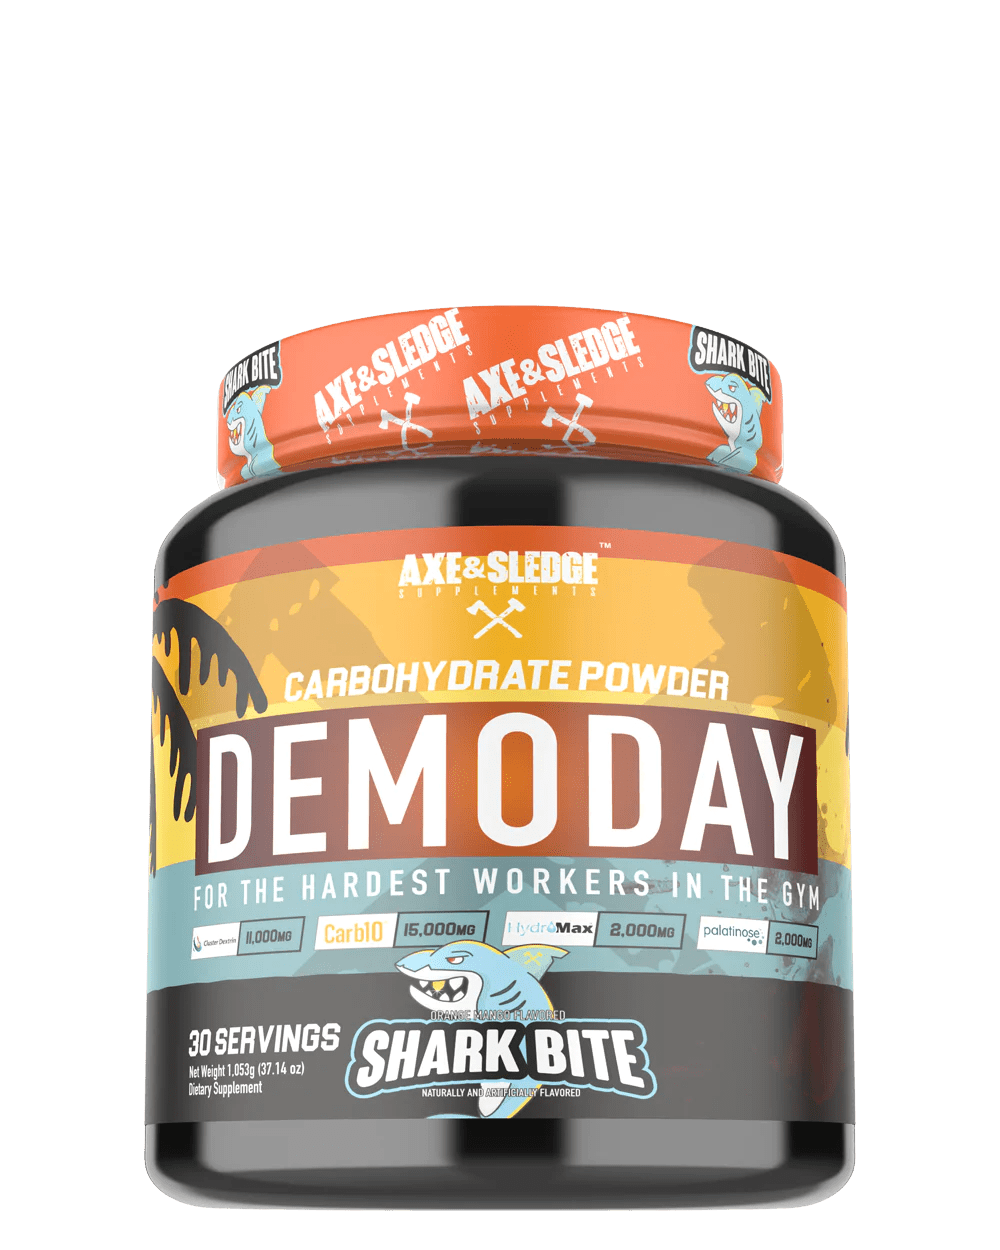 AXE & SLEDGEDEMO DAY V2 - CARBOHYDRATE POWDERCarbohydrate FormulaRED SUPPS